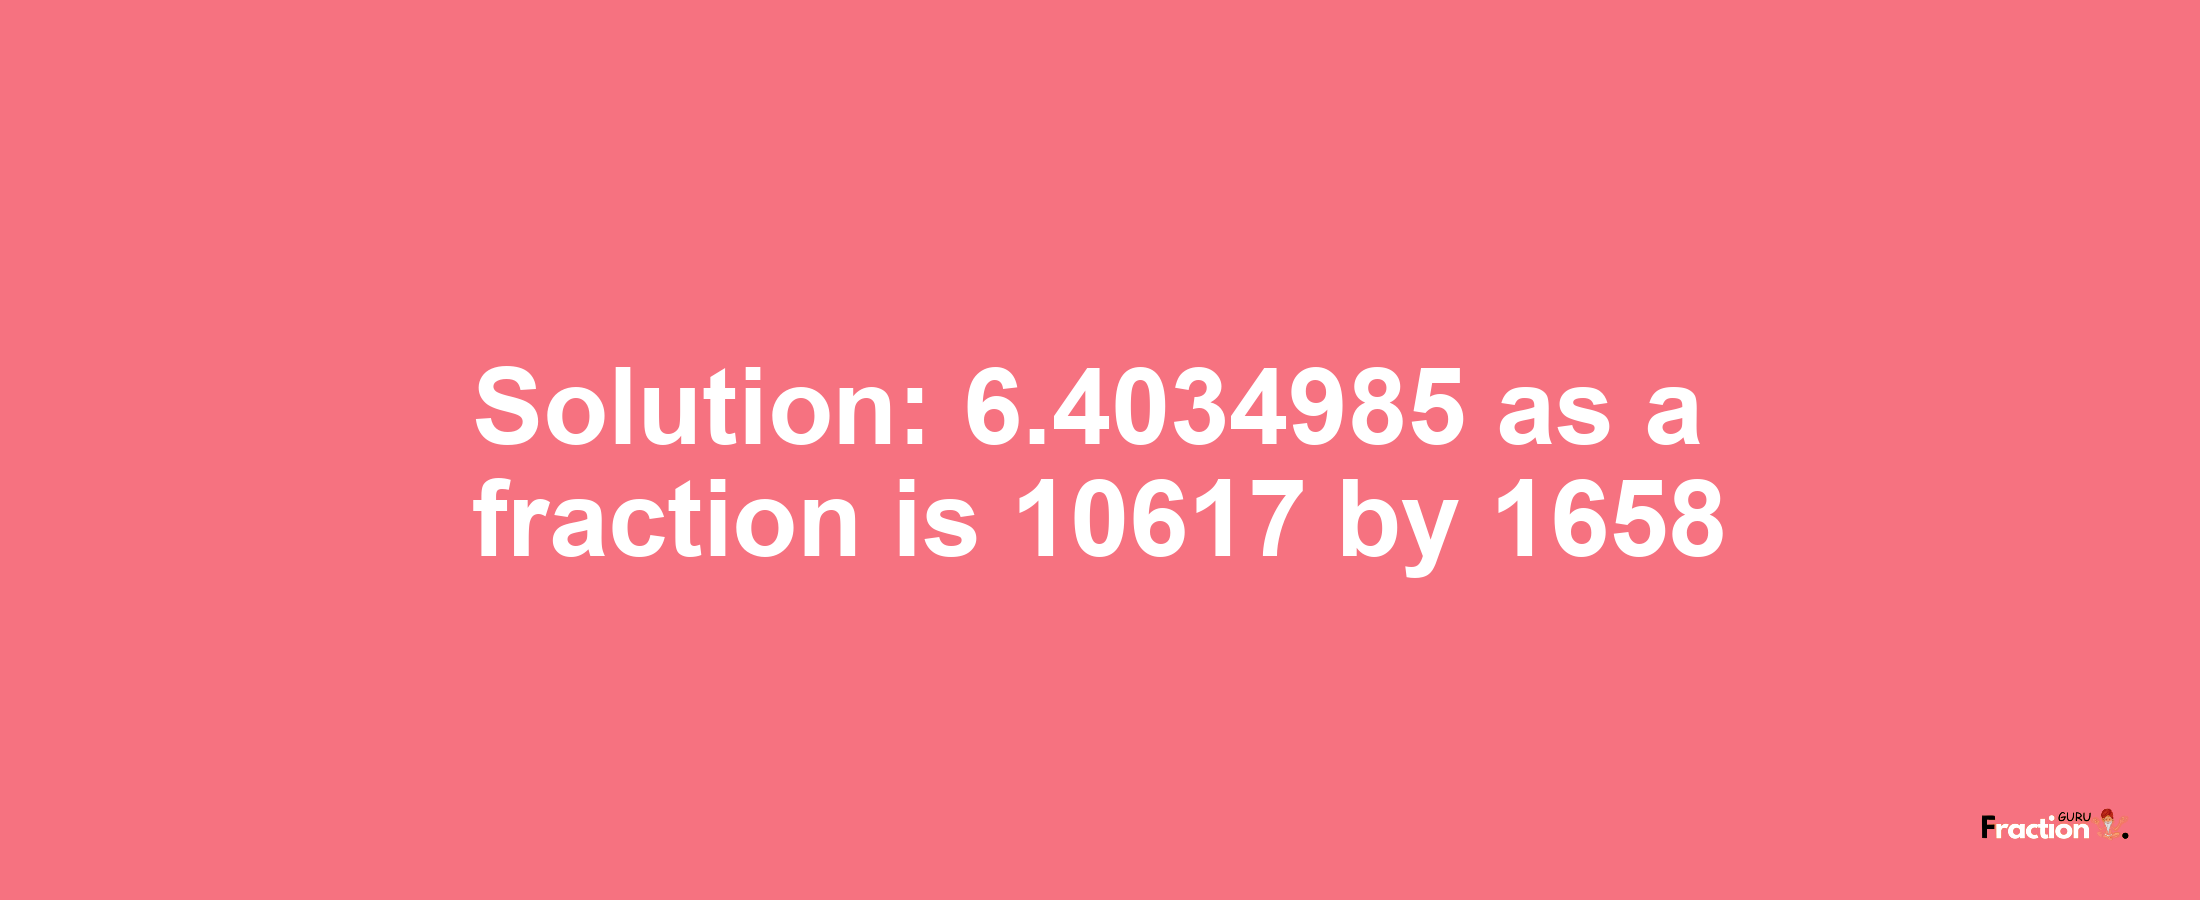 Solution:6.4034985 as a fraction is 10617/1658